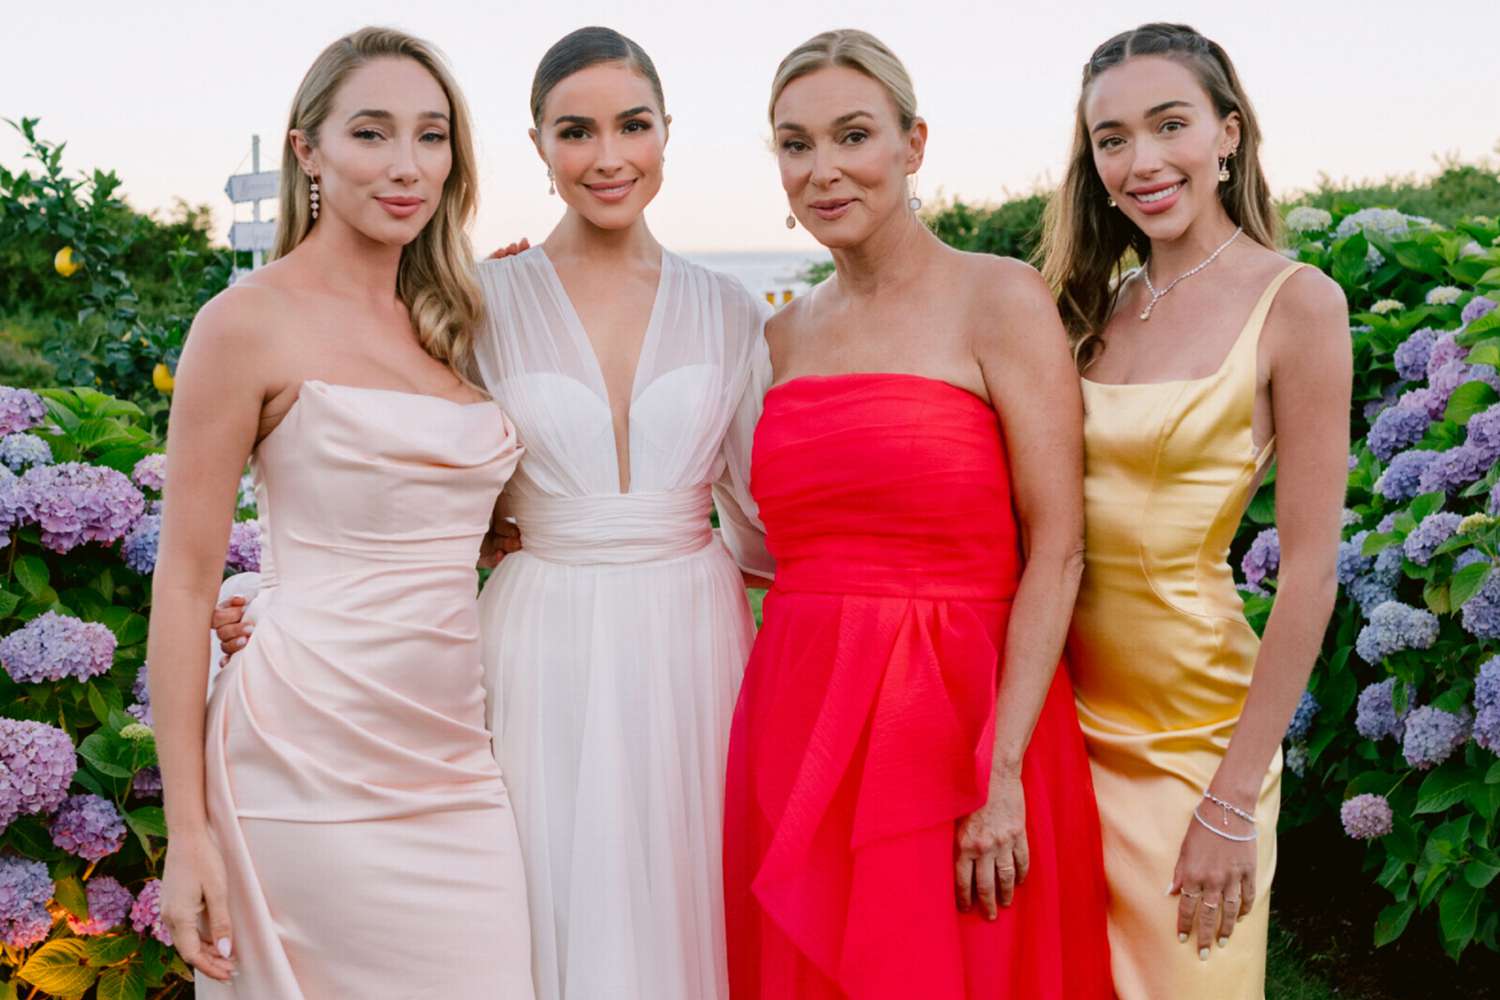 Sophia Culpo Shares Inside Look at Sister Olivia's Wedding Day Prep: 'Chaos Has Ensued' (Exclusive)